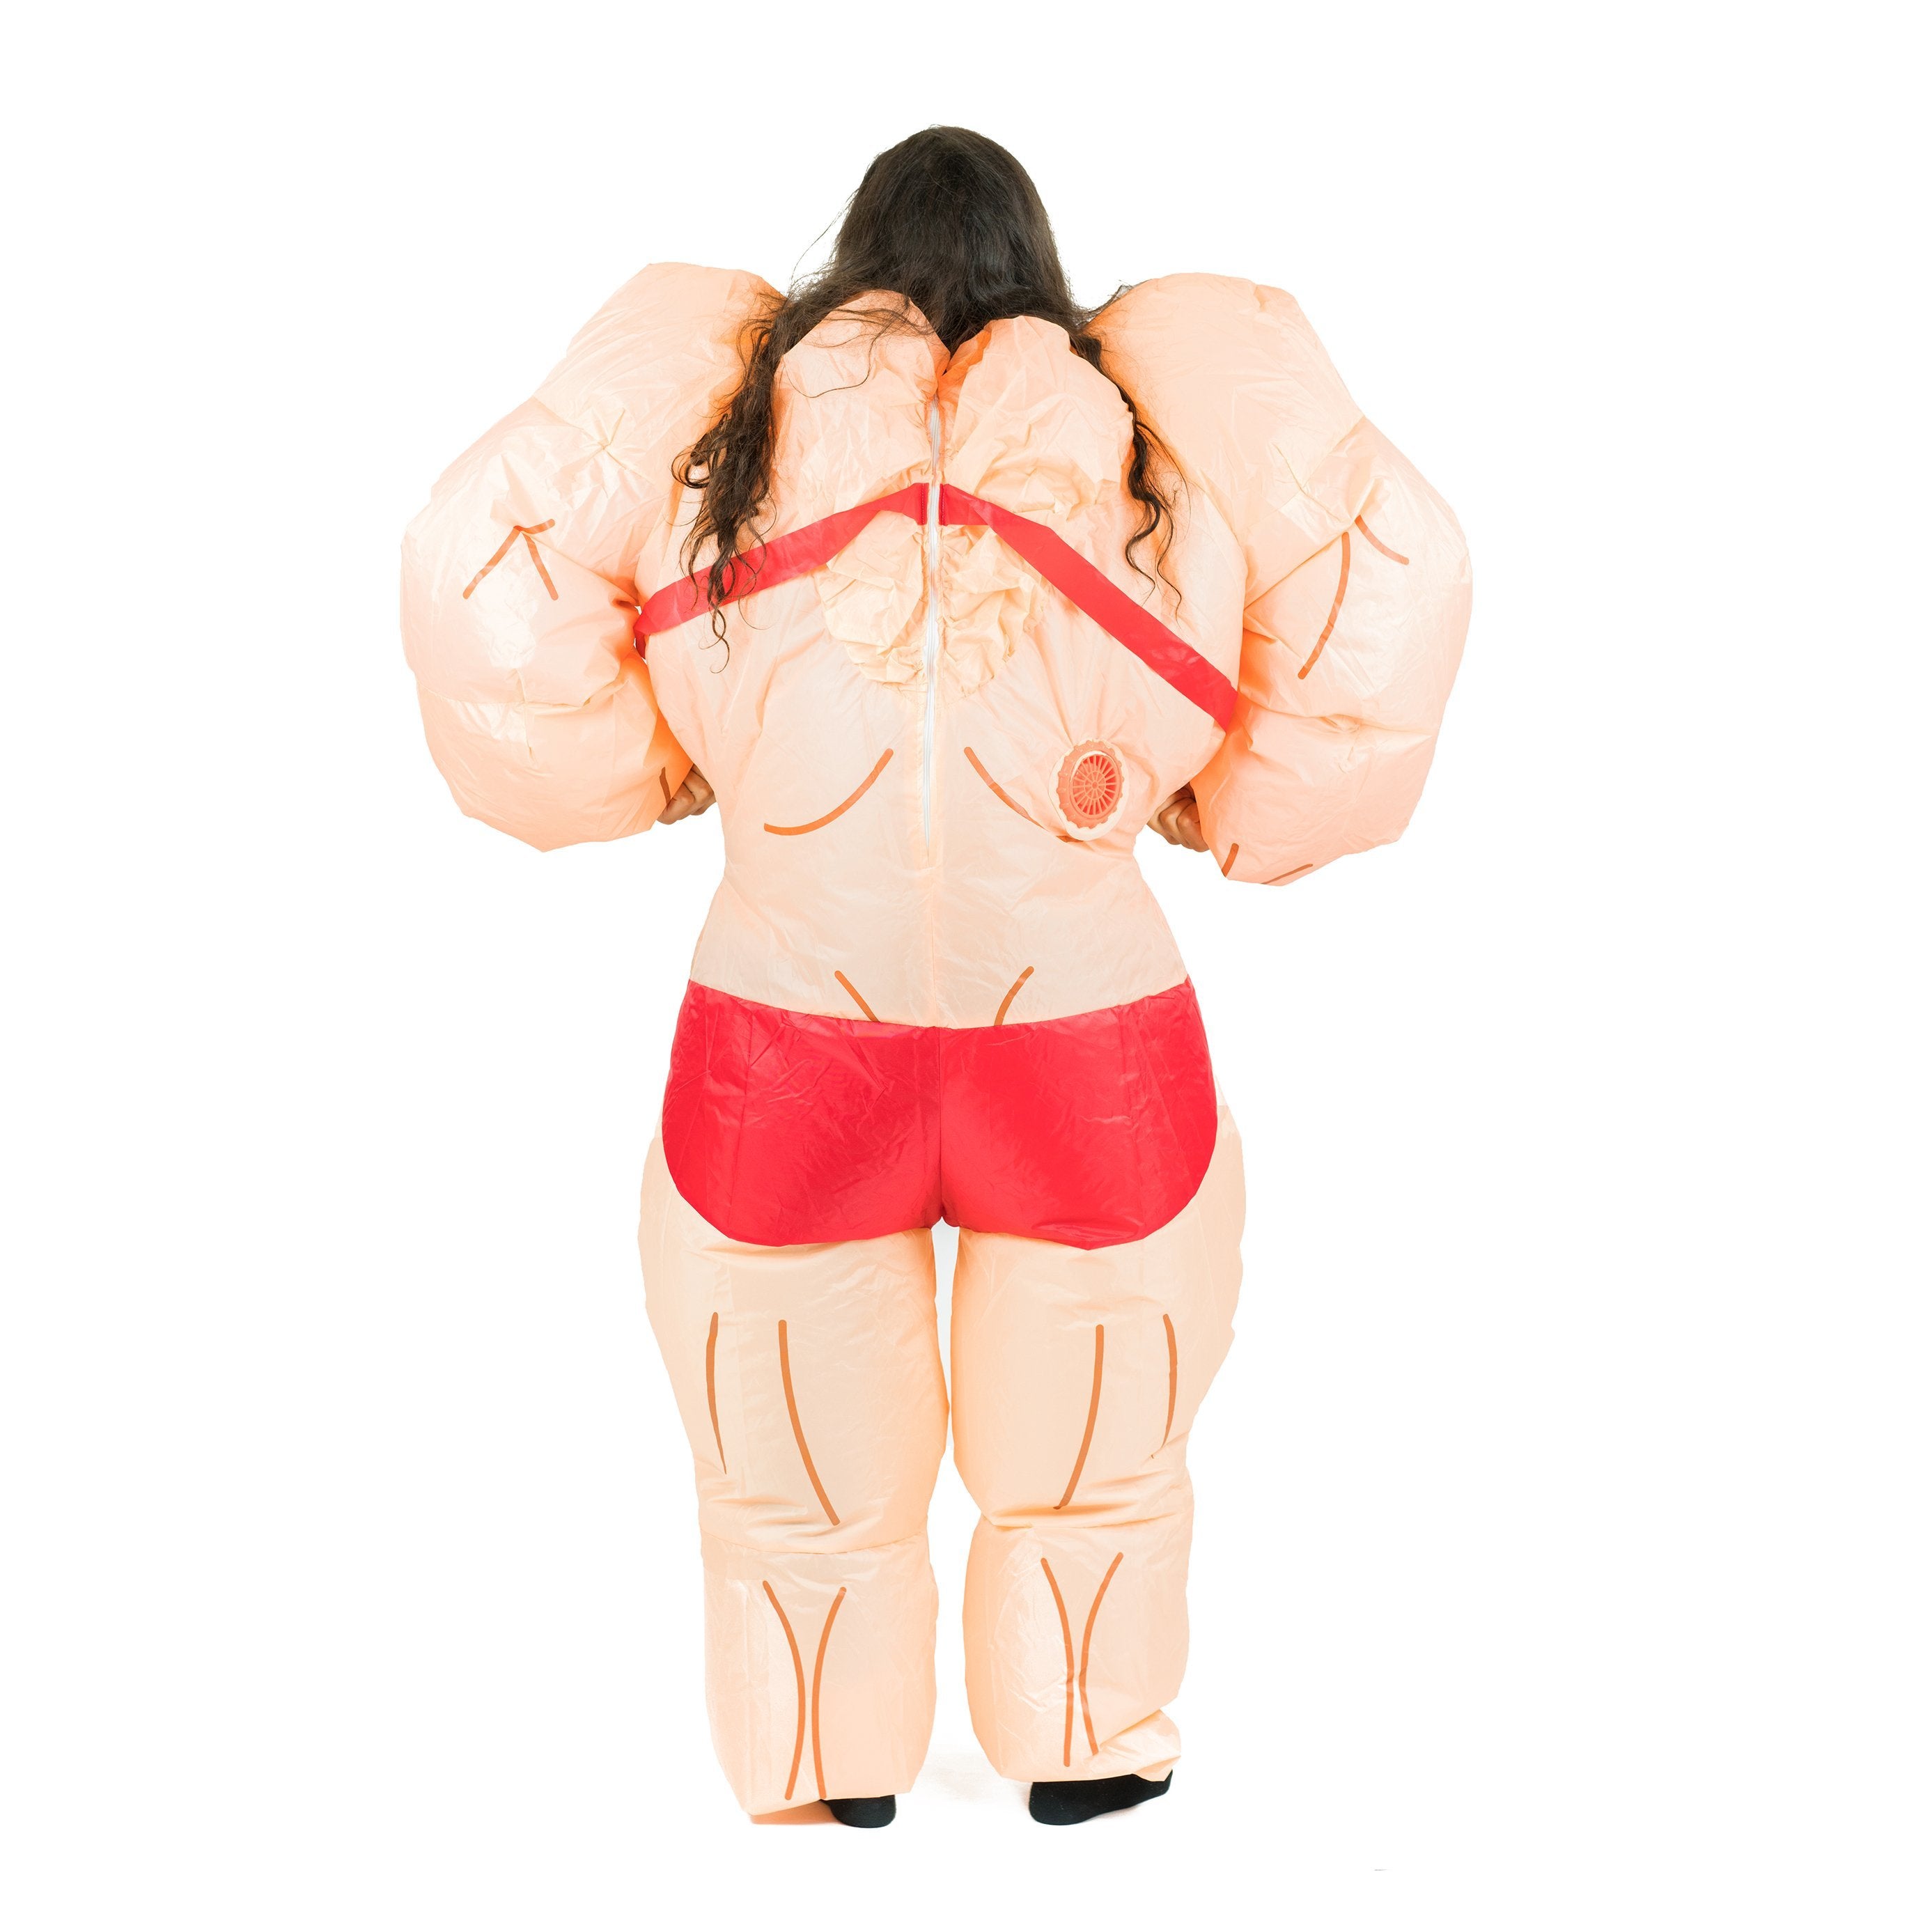 Bodysocks - Inflatable Lady Muscle Suit Costume